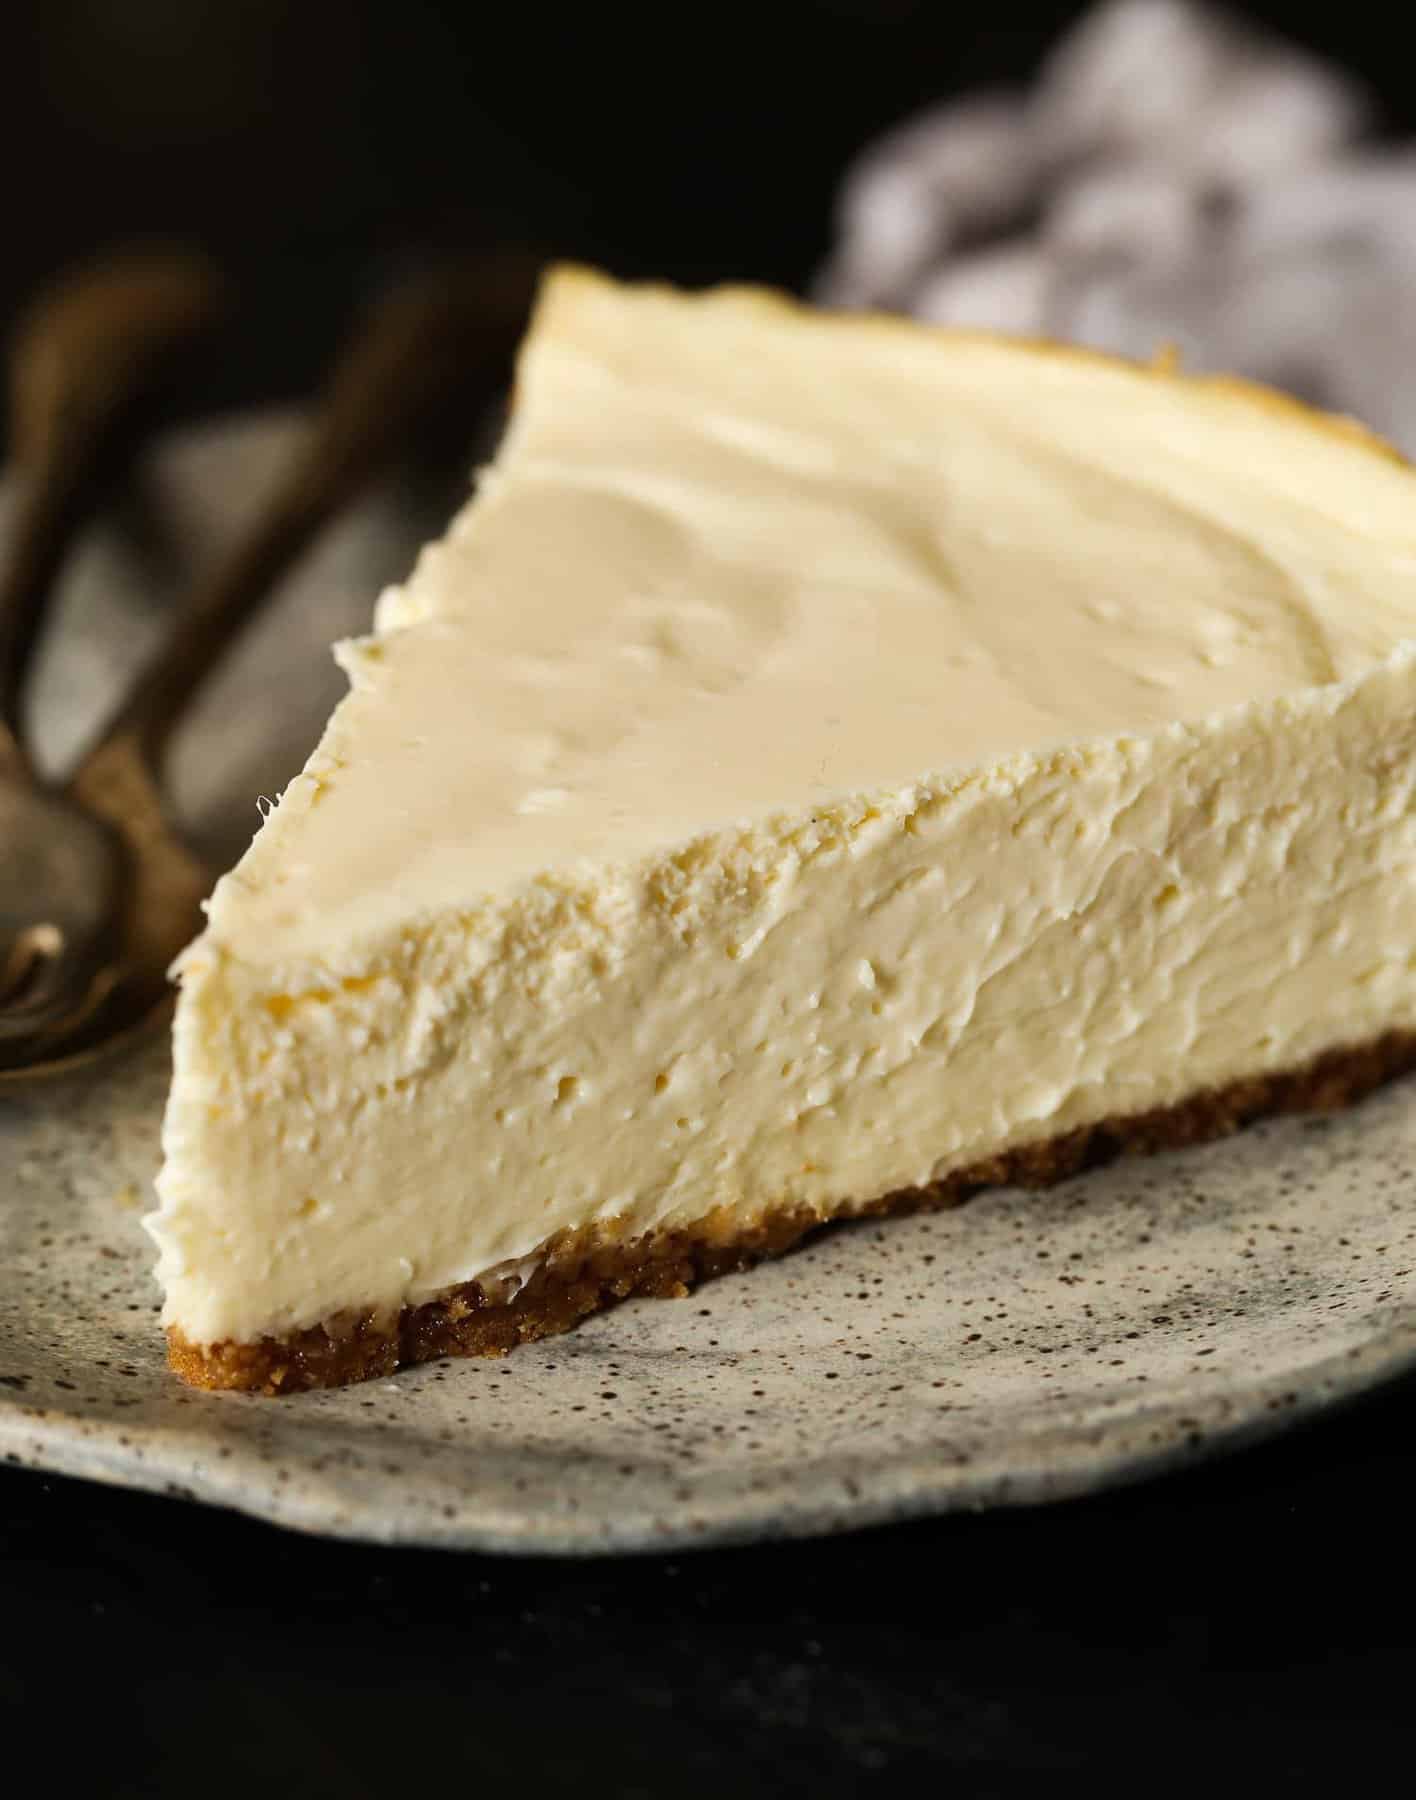 A slice of homemade cheesecake on a plate